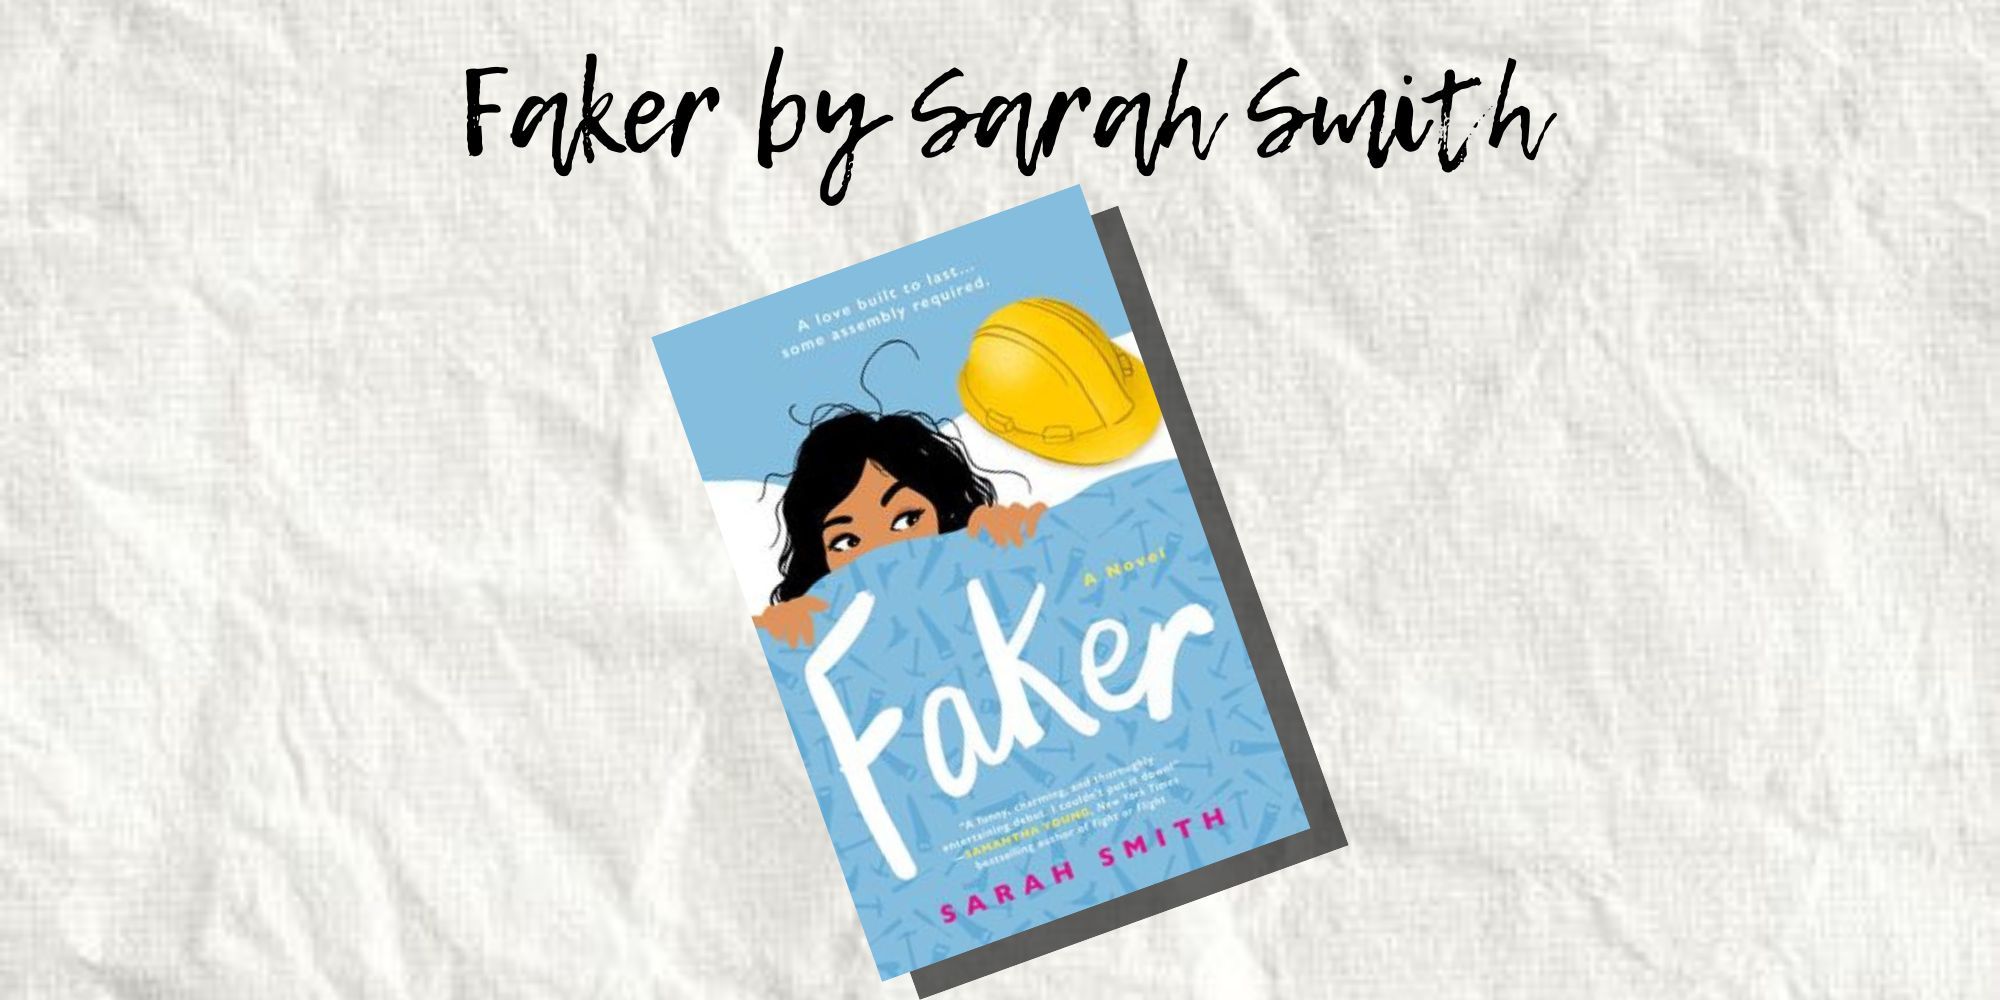 The Cover of Faker by Sarah Smith